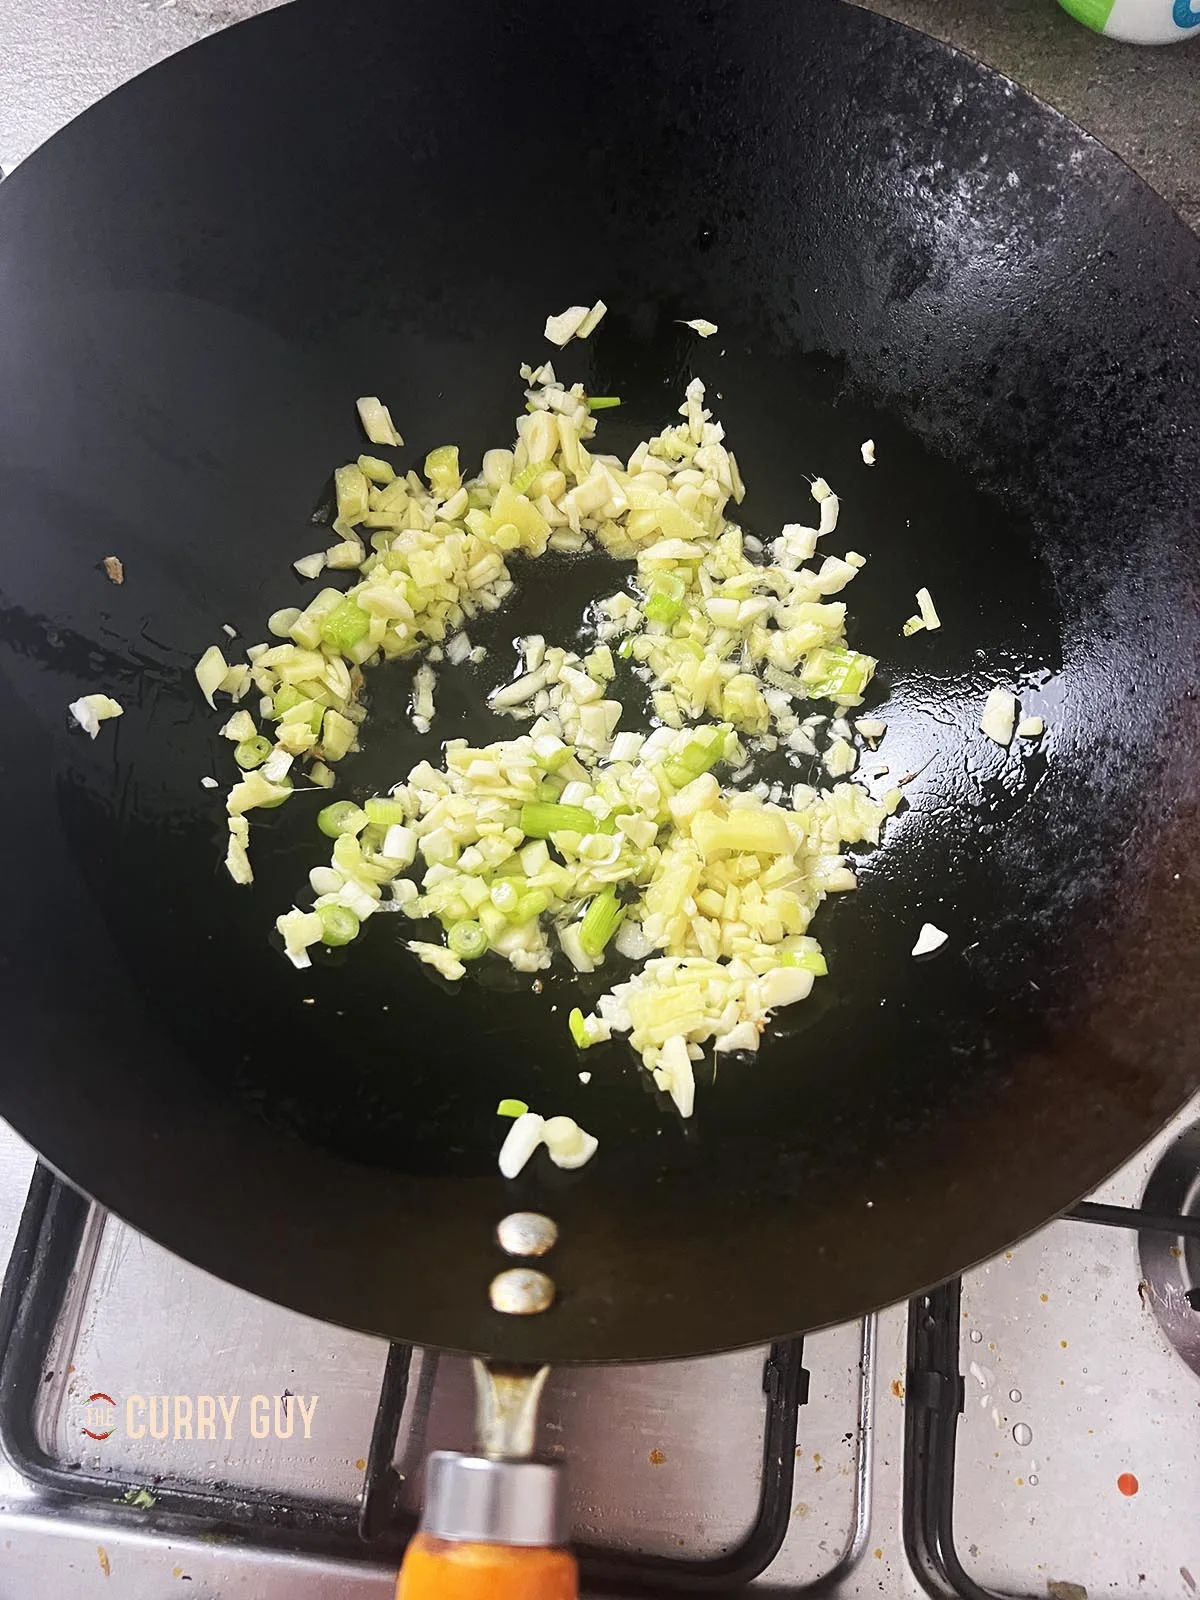 Frying garlic, ginger and spring onions (scallions) in a wok.